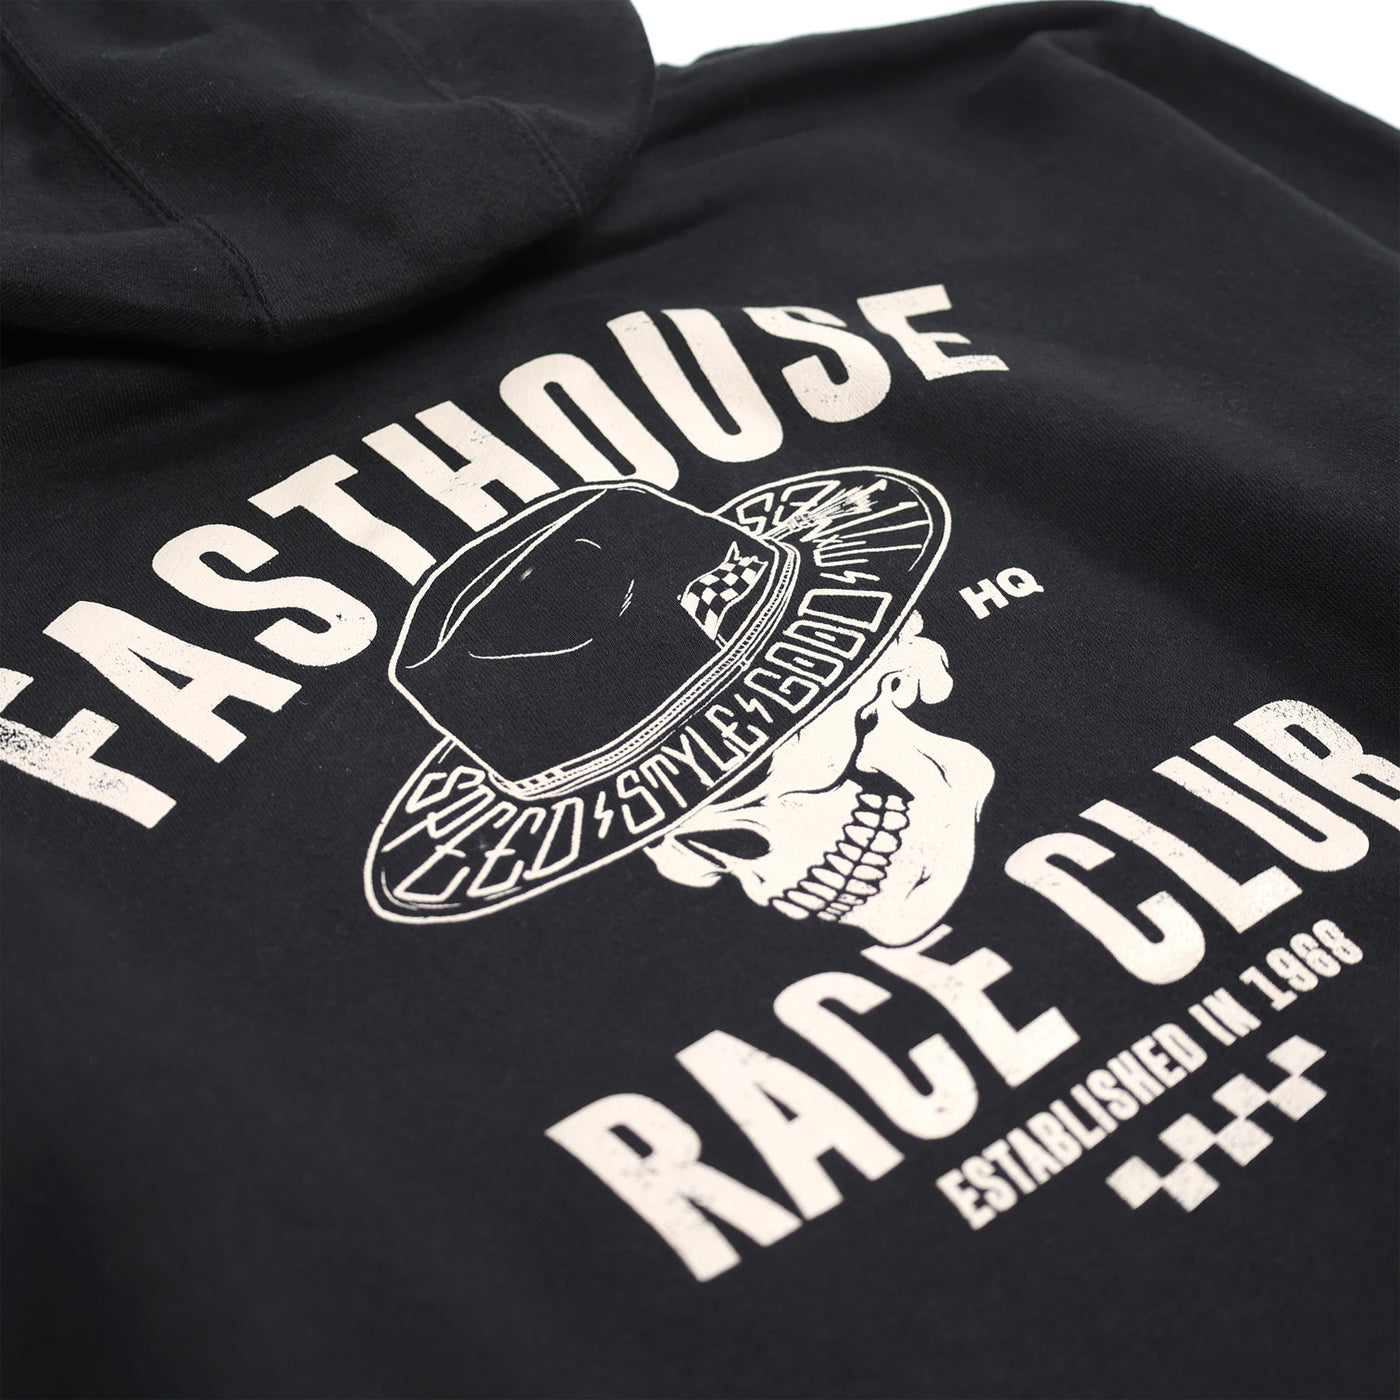 Fasthouse Resort HQ Club Hooded Pullover